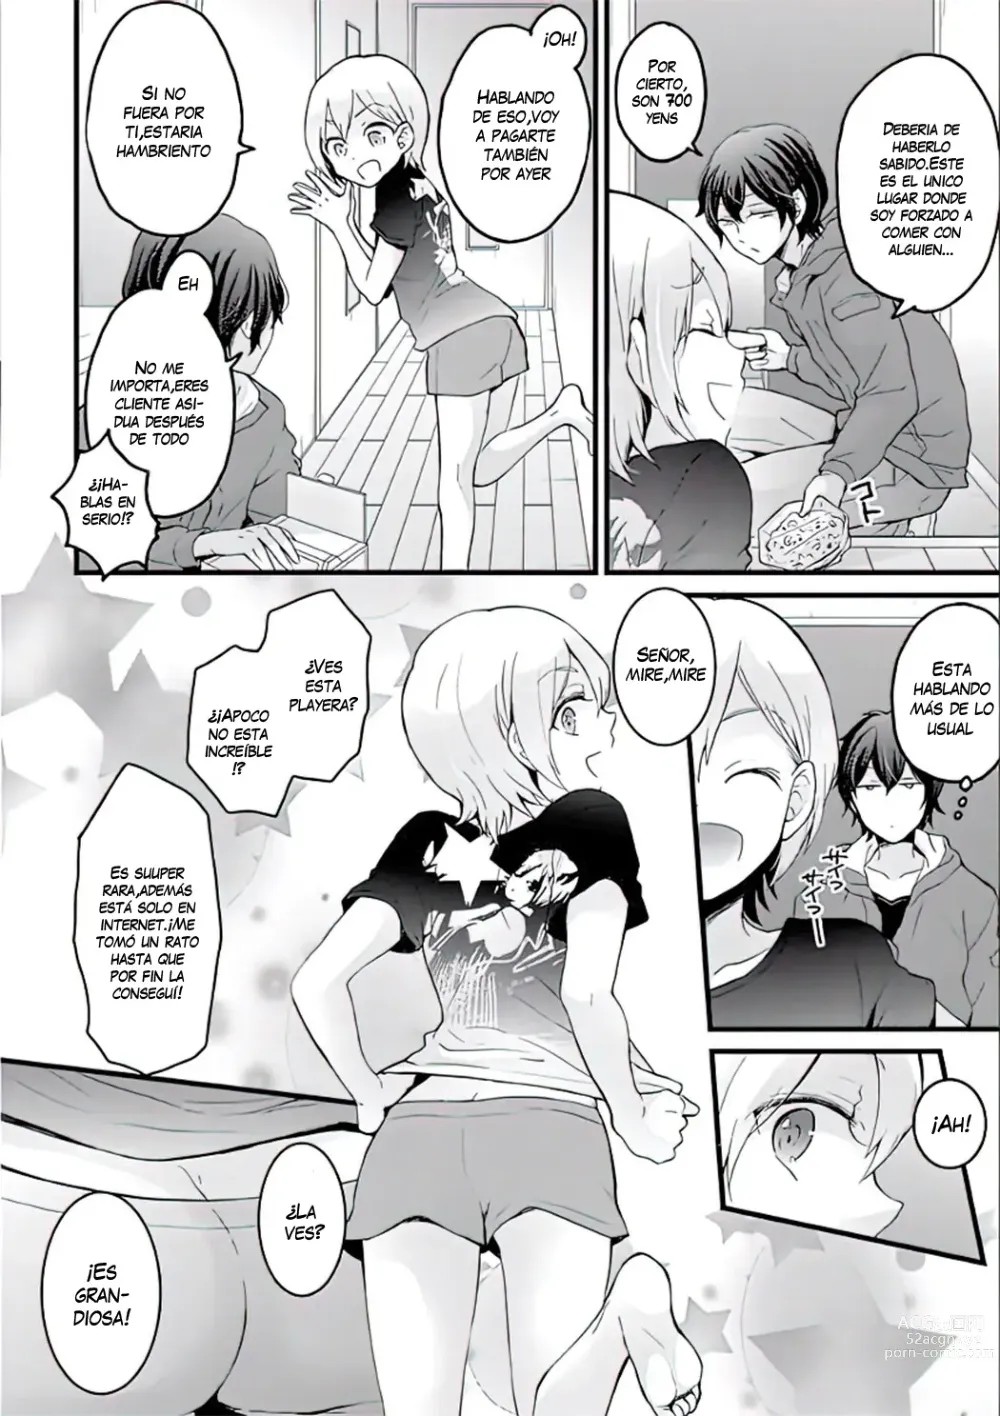 Page 2 of manga Delivery As Usual